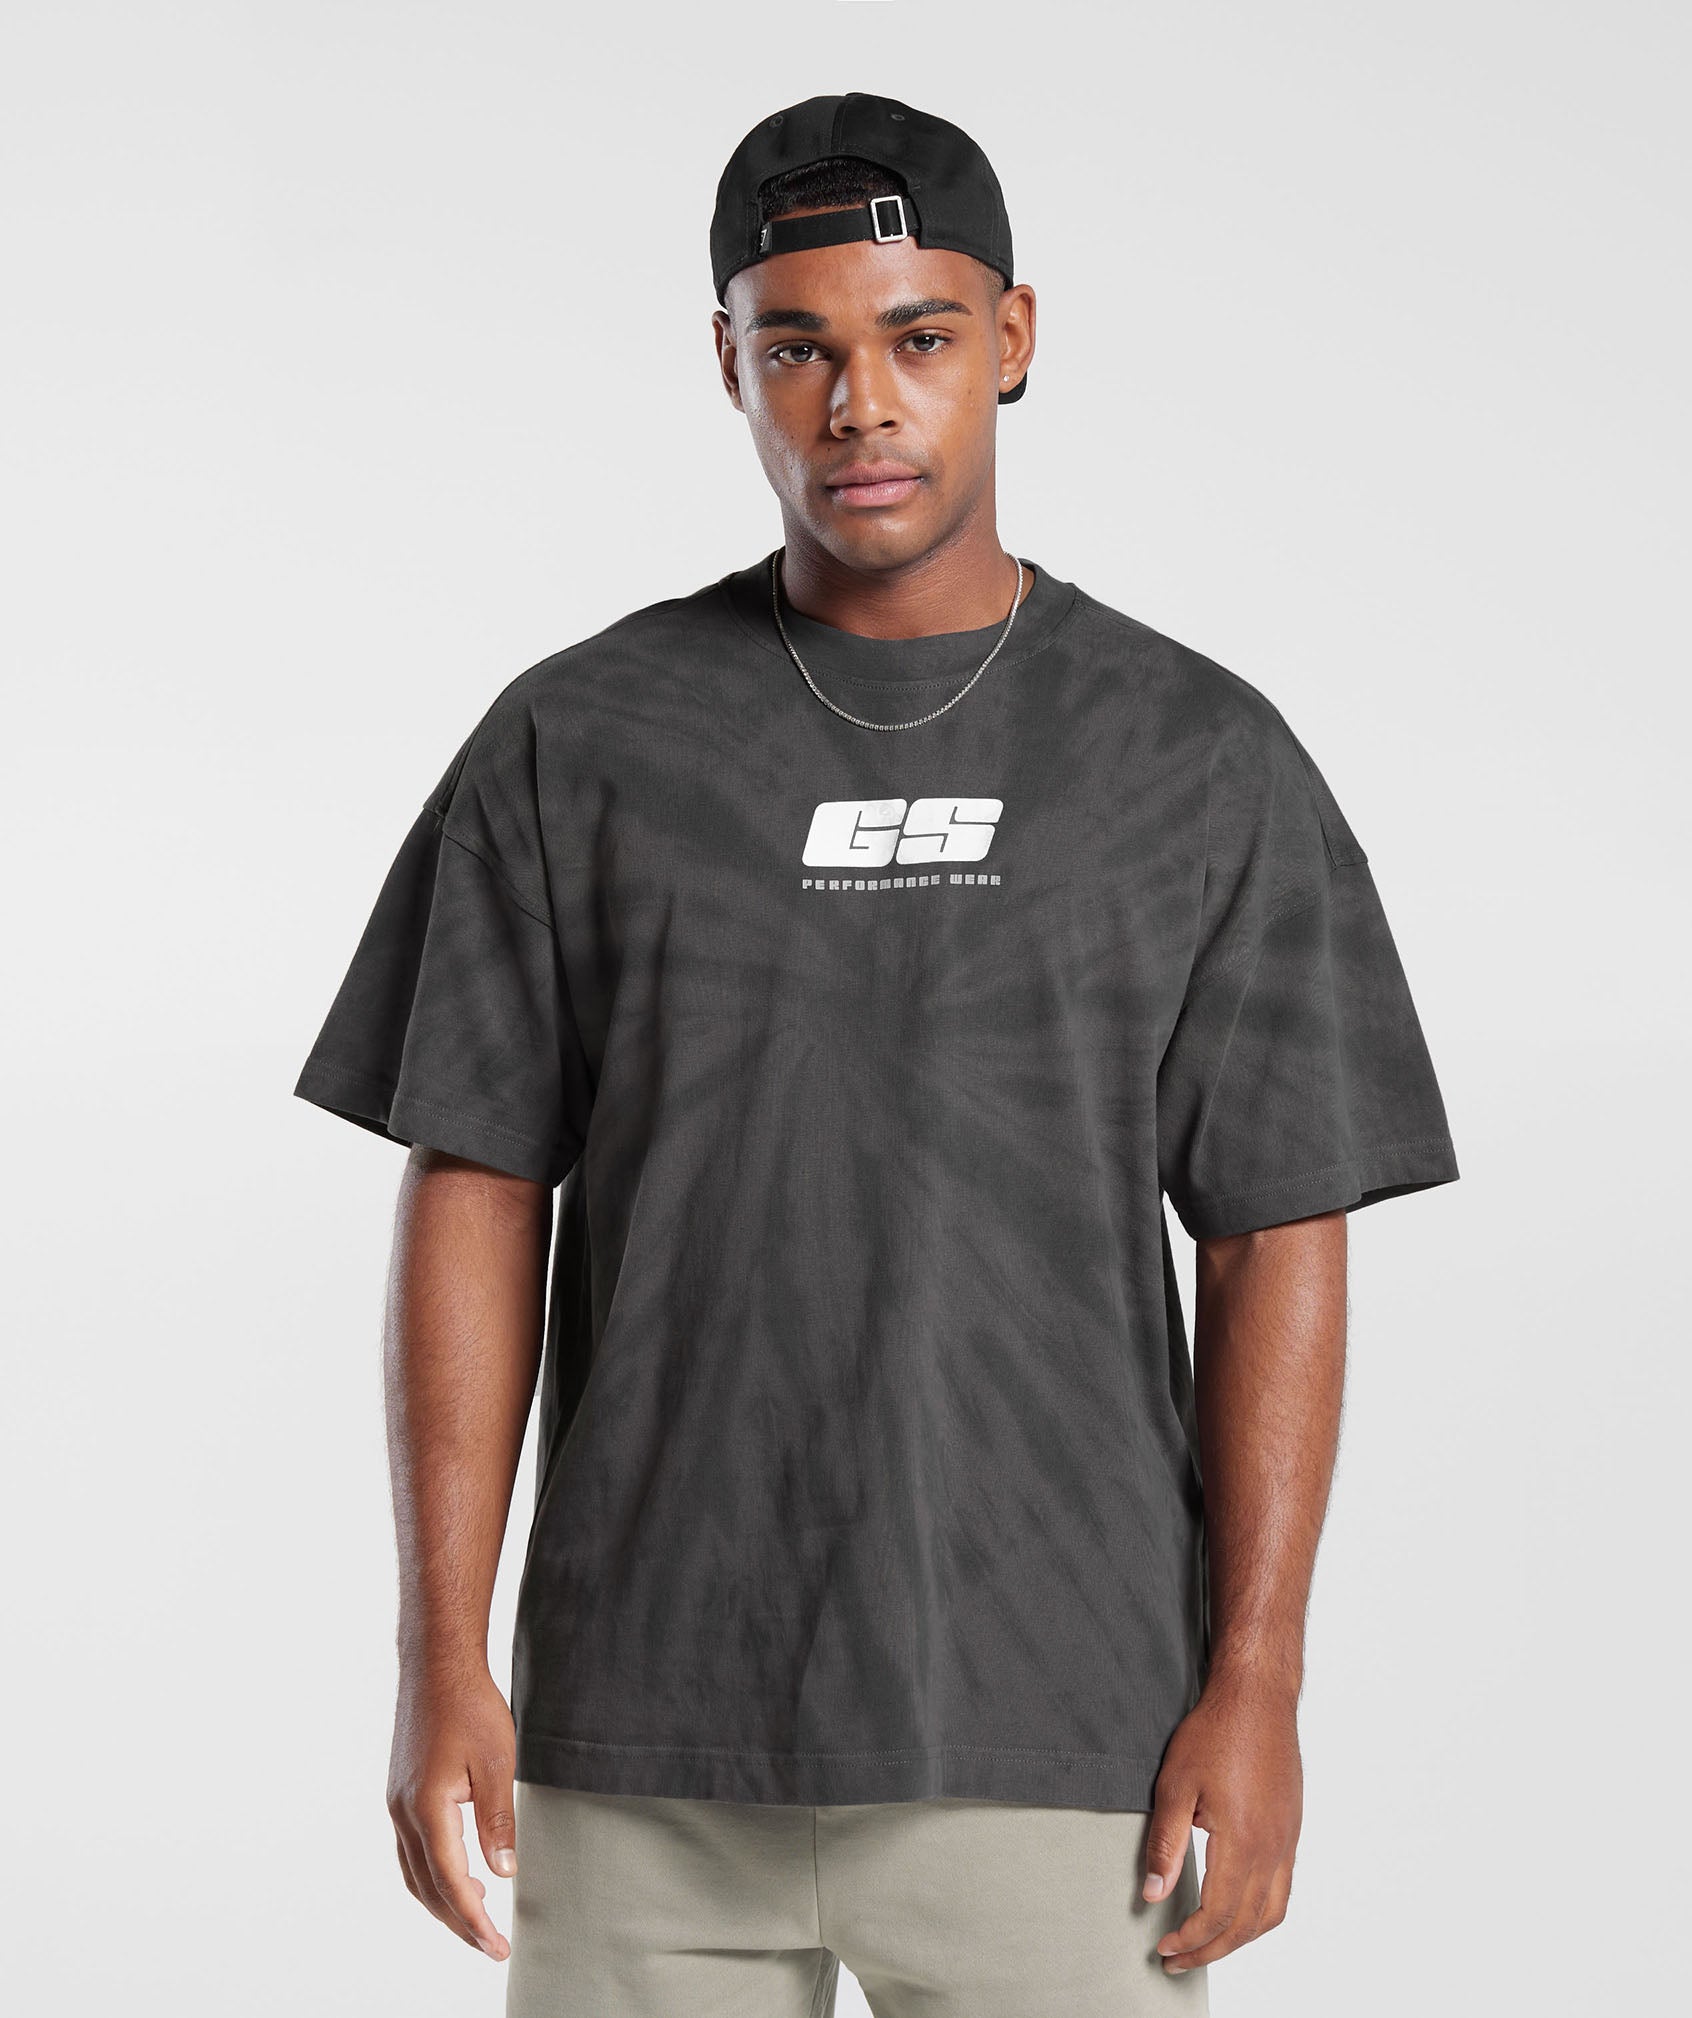 Rest Day T-Shirt in Silhouette Grey/Black/Spiral Optic Wash - view 1